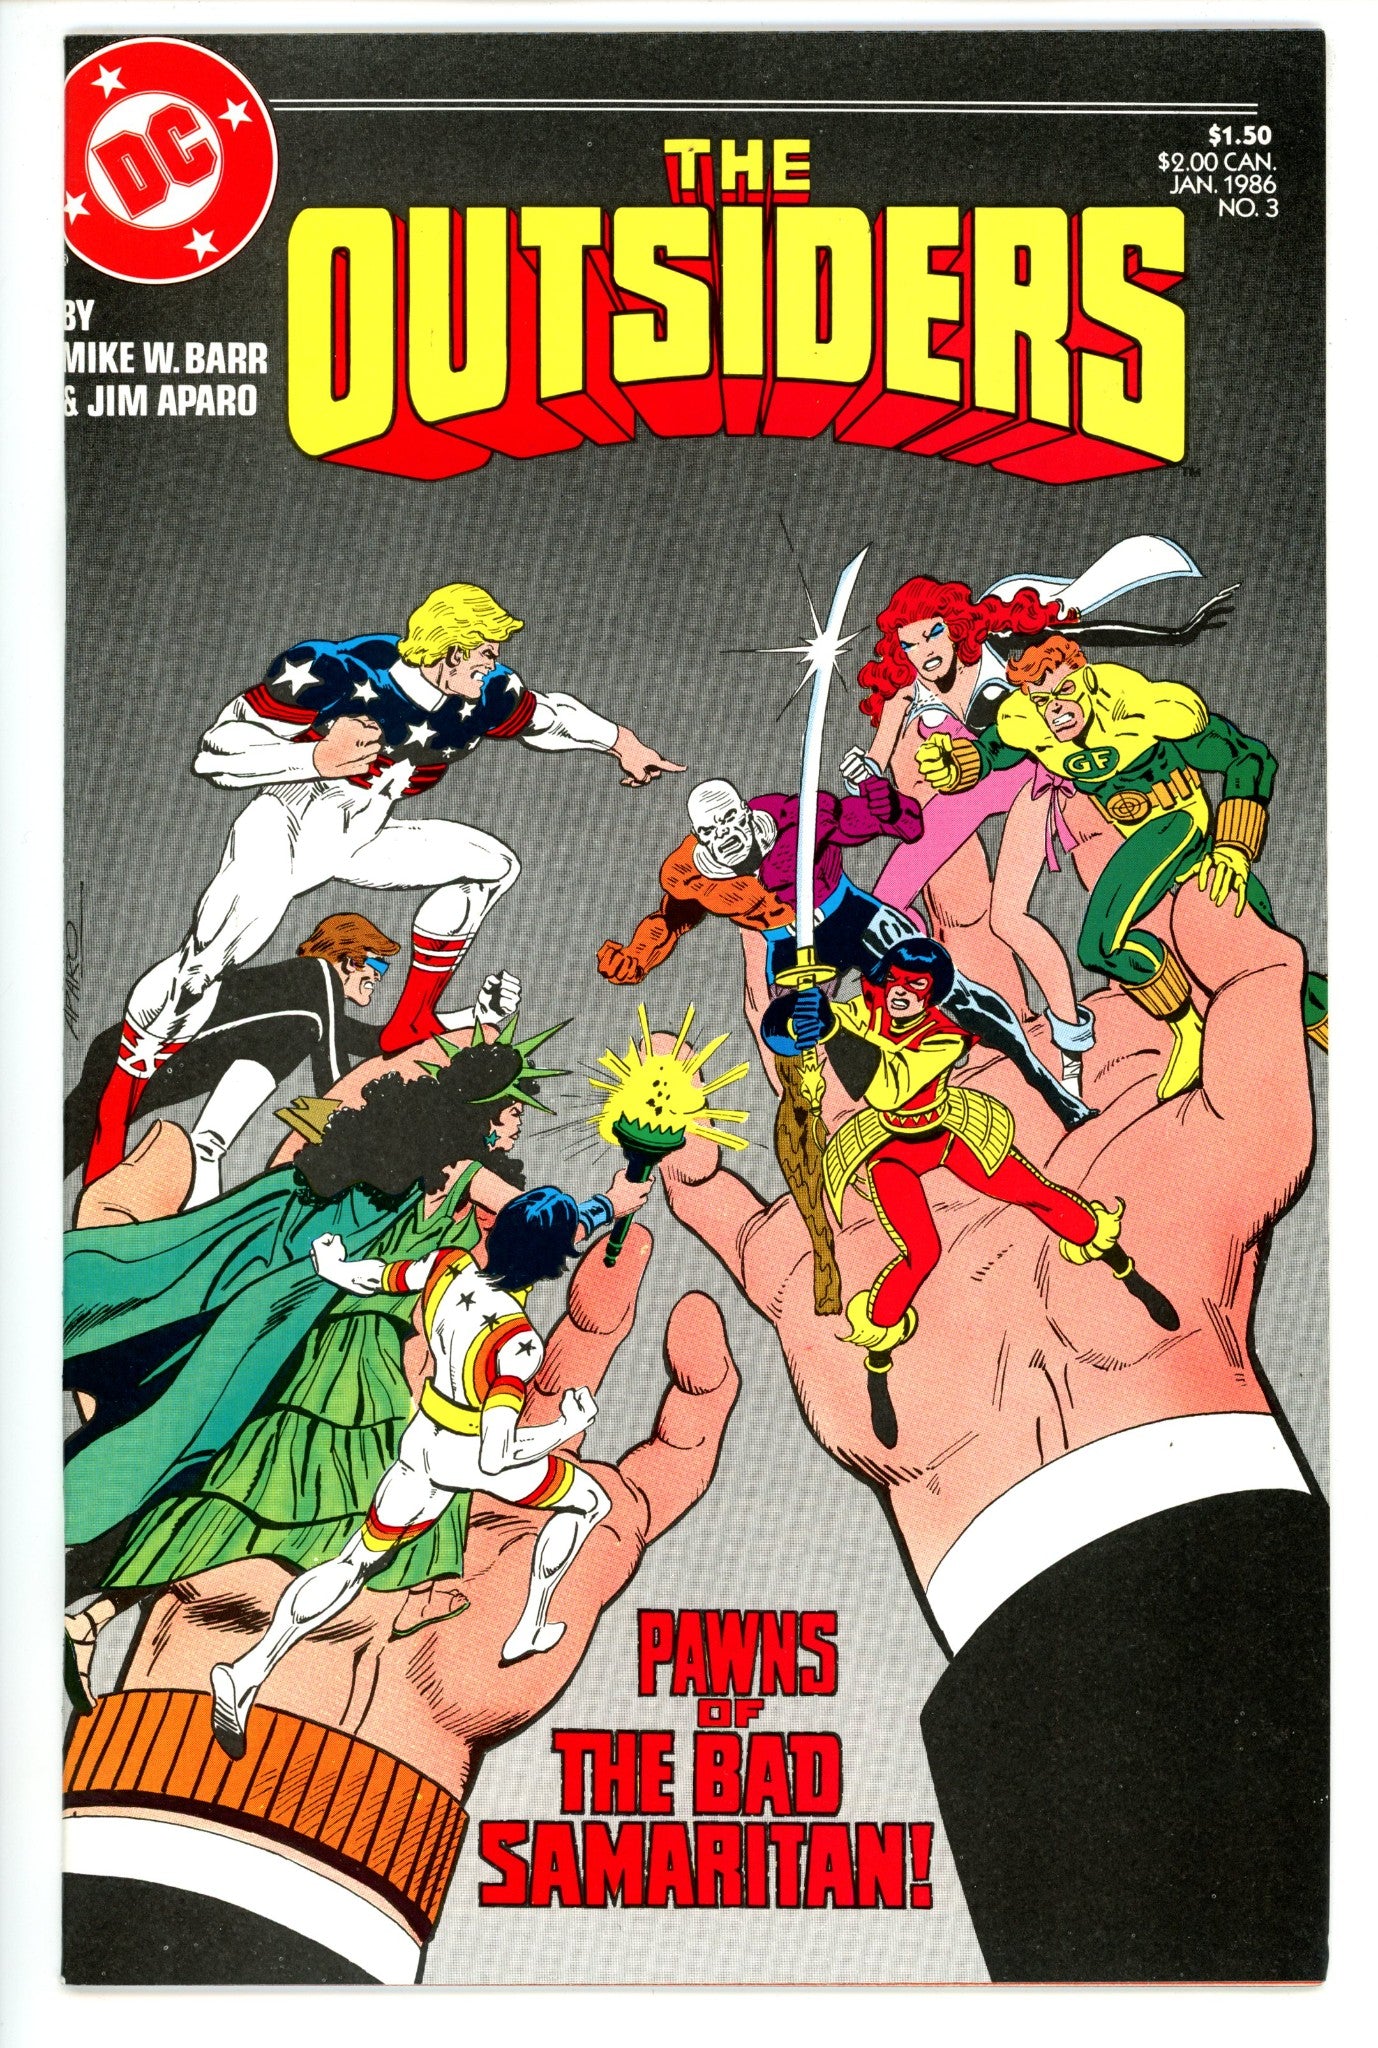 The Outsiders Vol 1 3